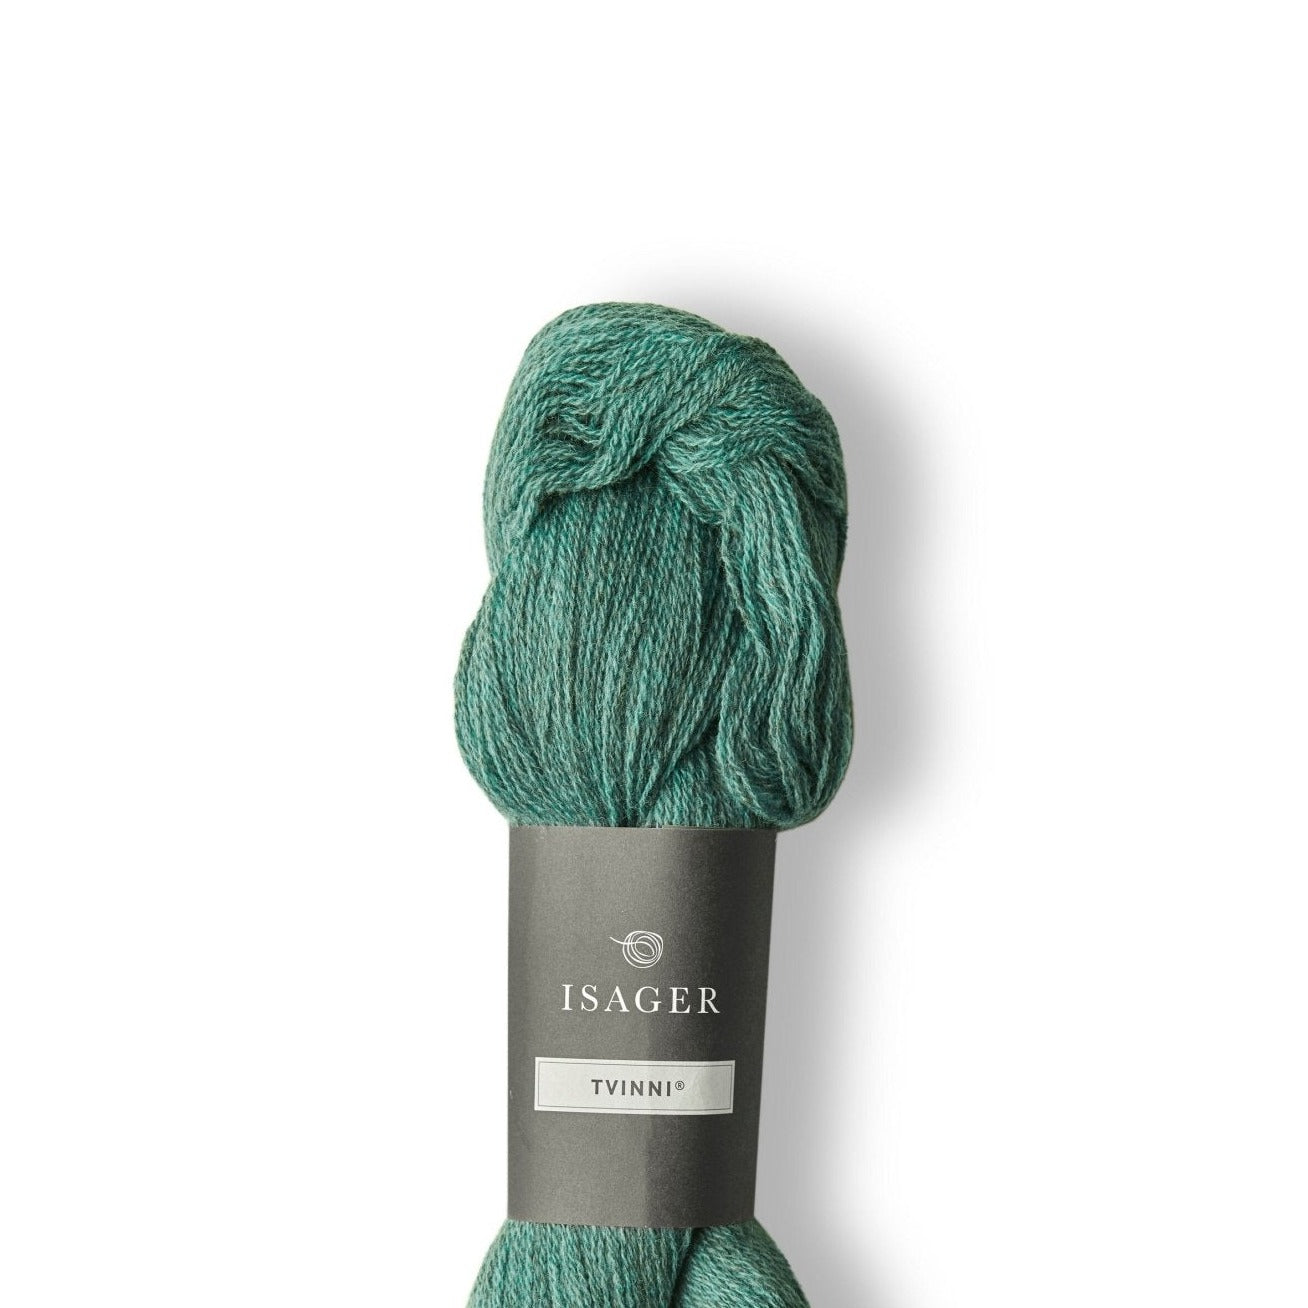 Isager Tvinni - 26s - 4 Ply - Isager - The Little Yarn Store